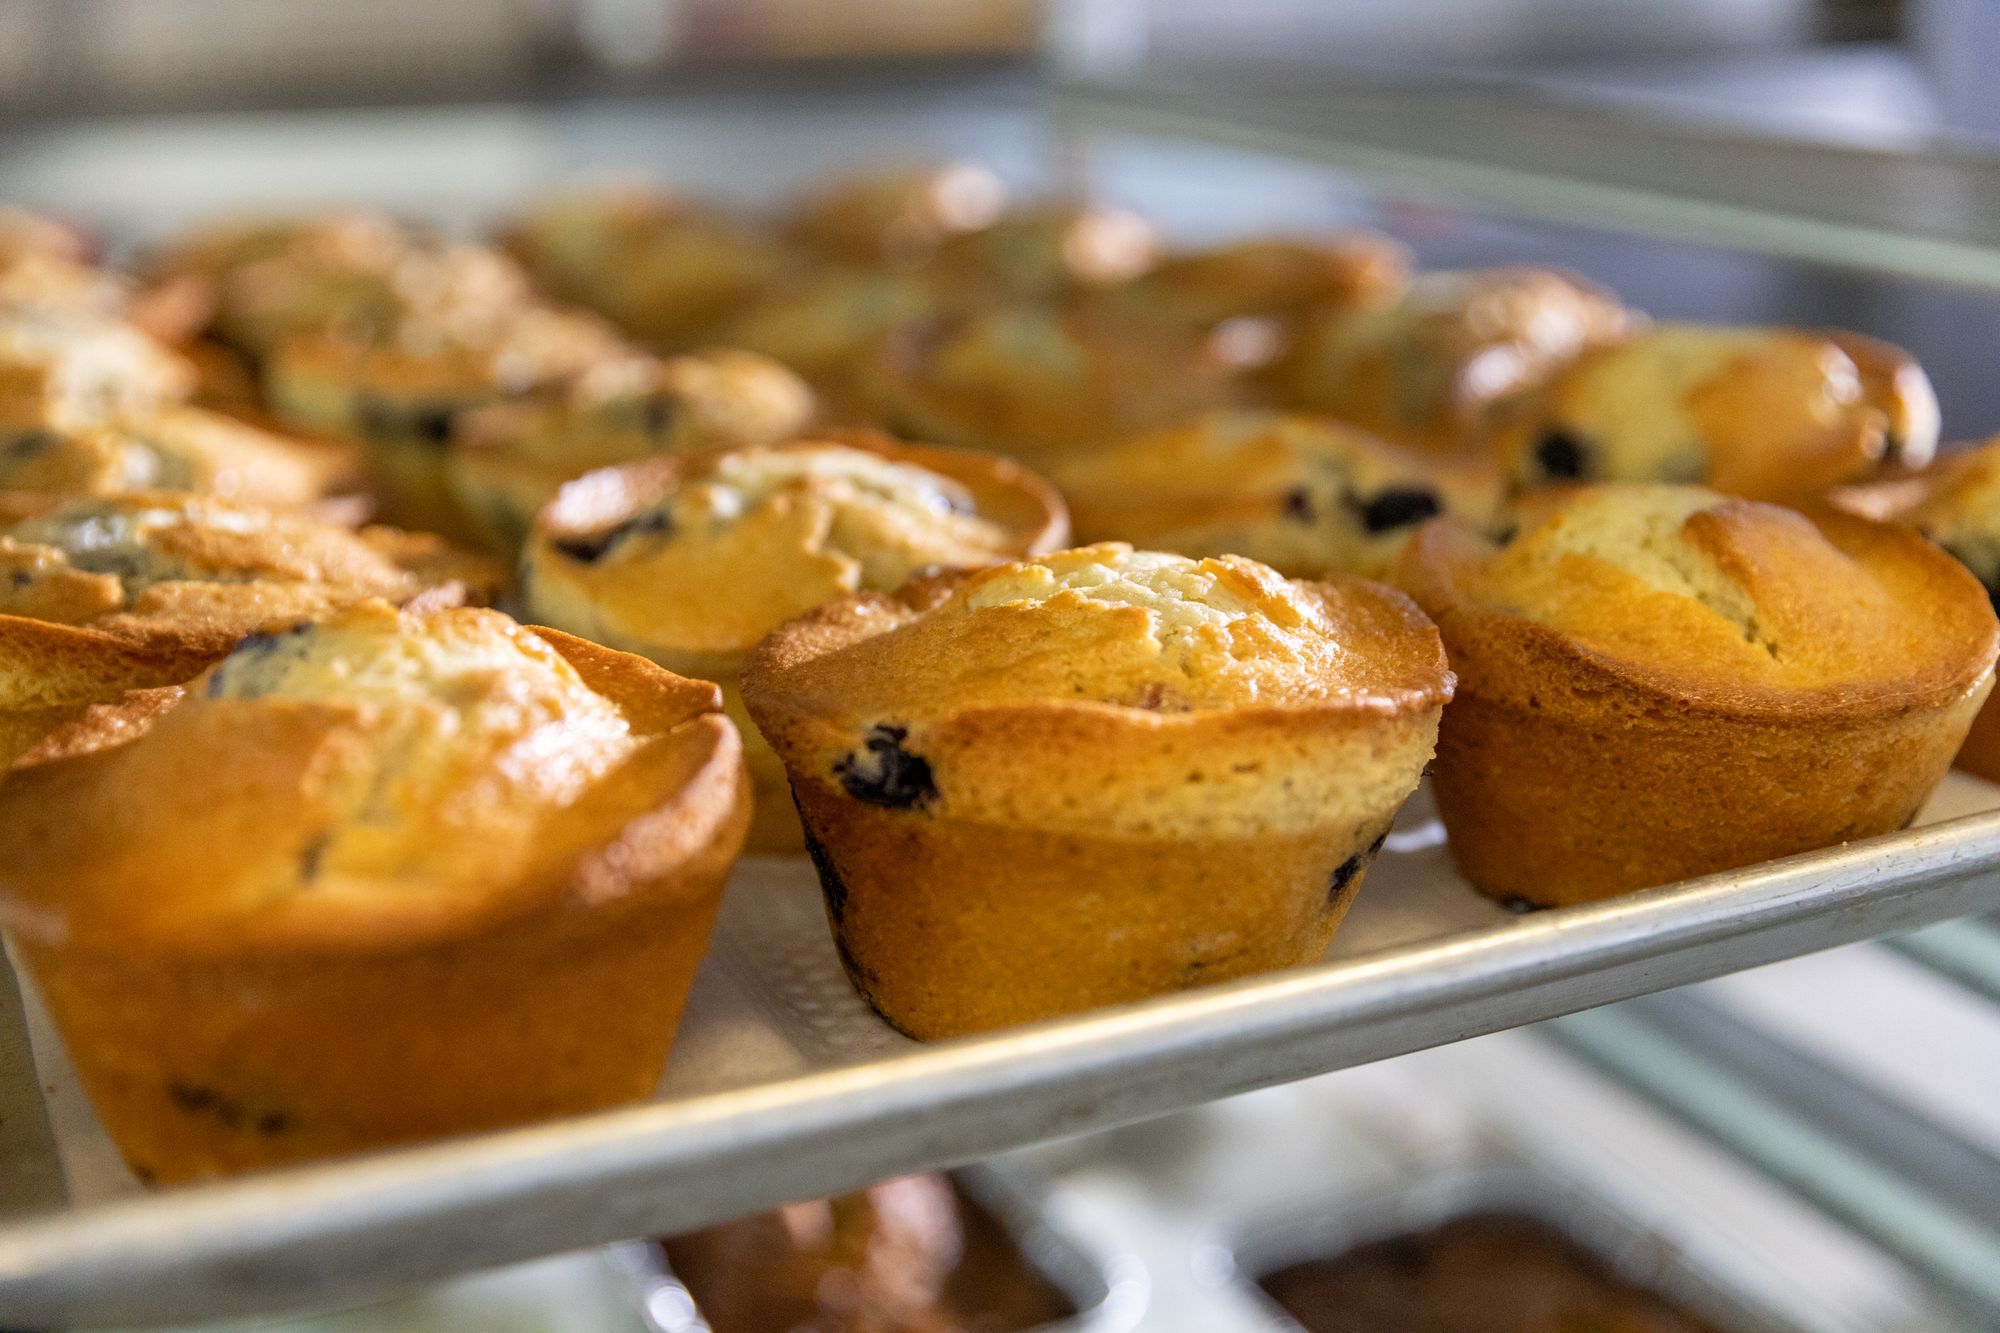 Fresh blueberry muffins cool after coming out of the oven at On the Rise Bakery in Detroit.